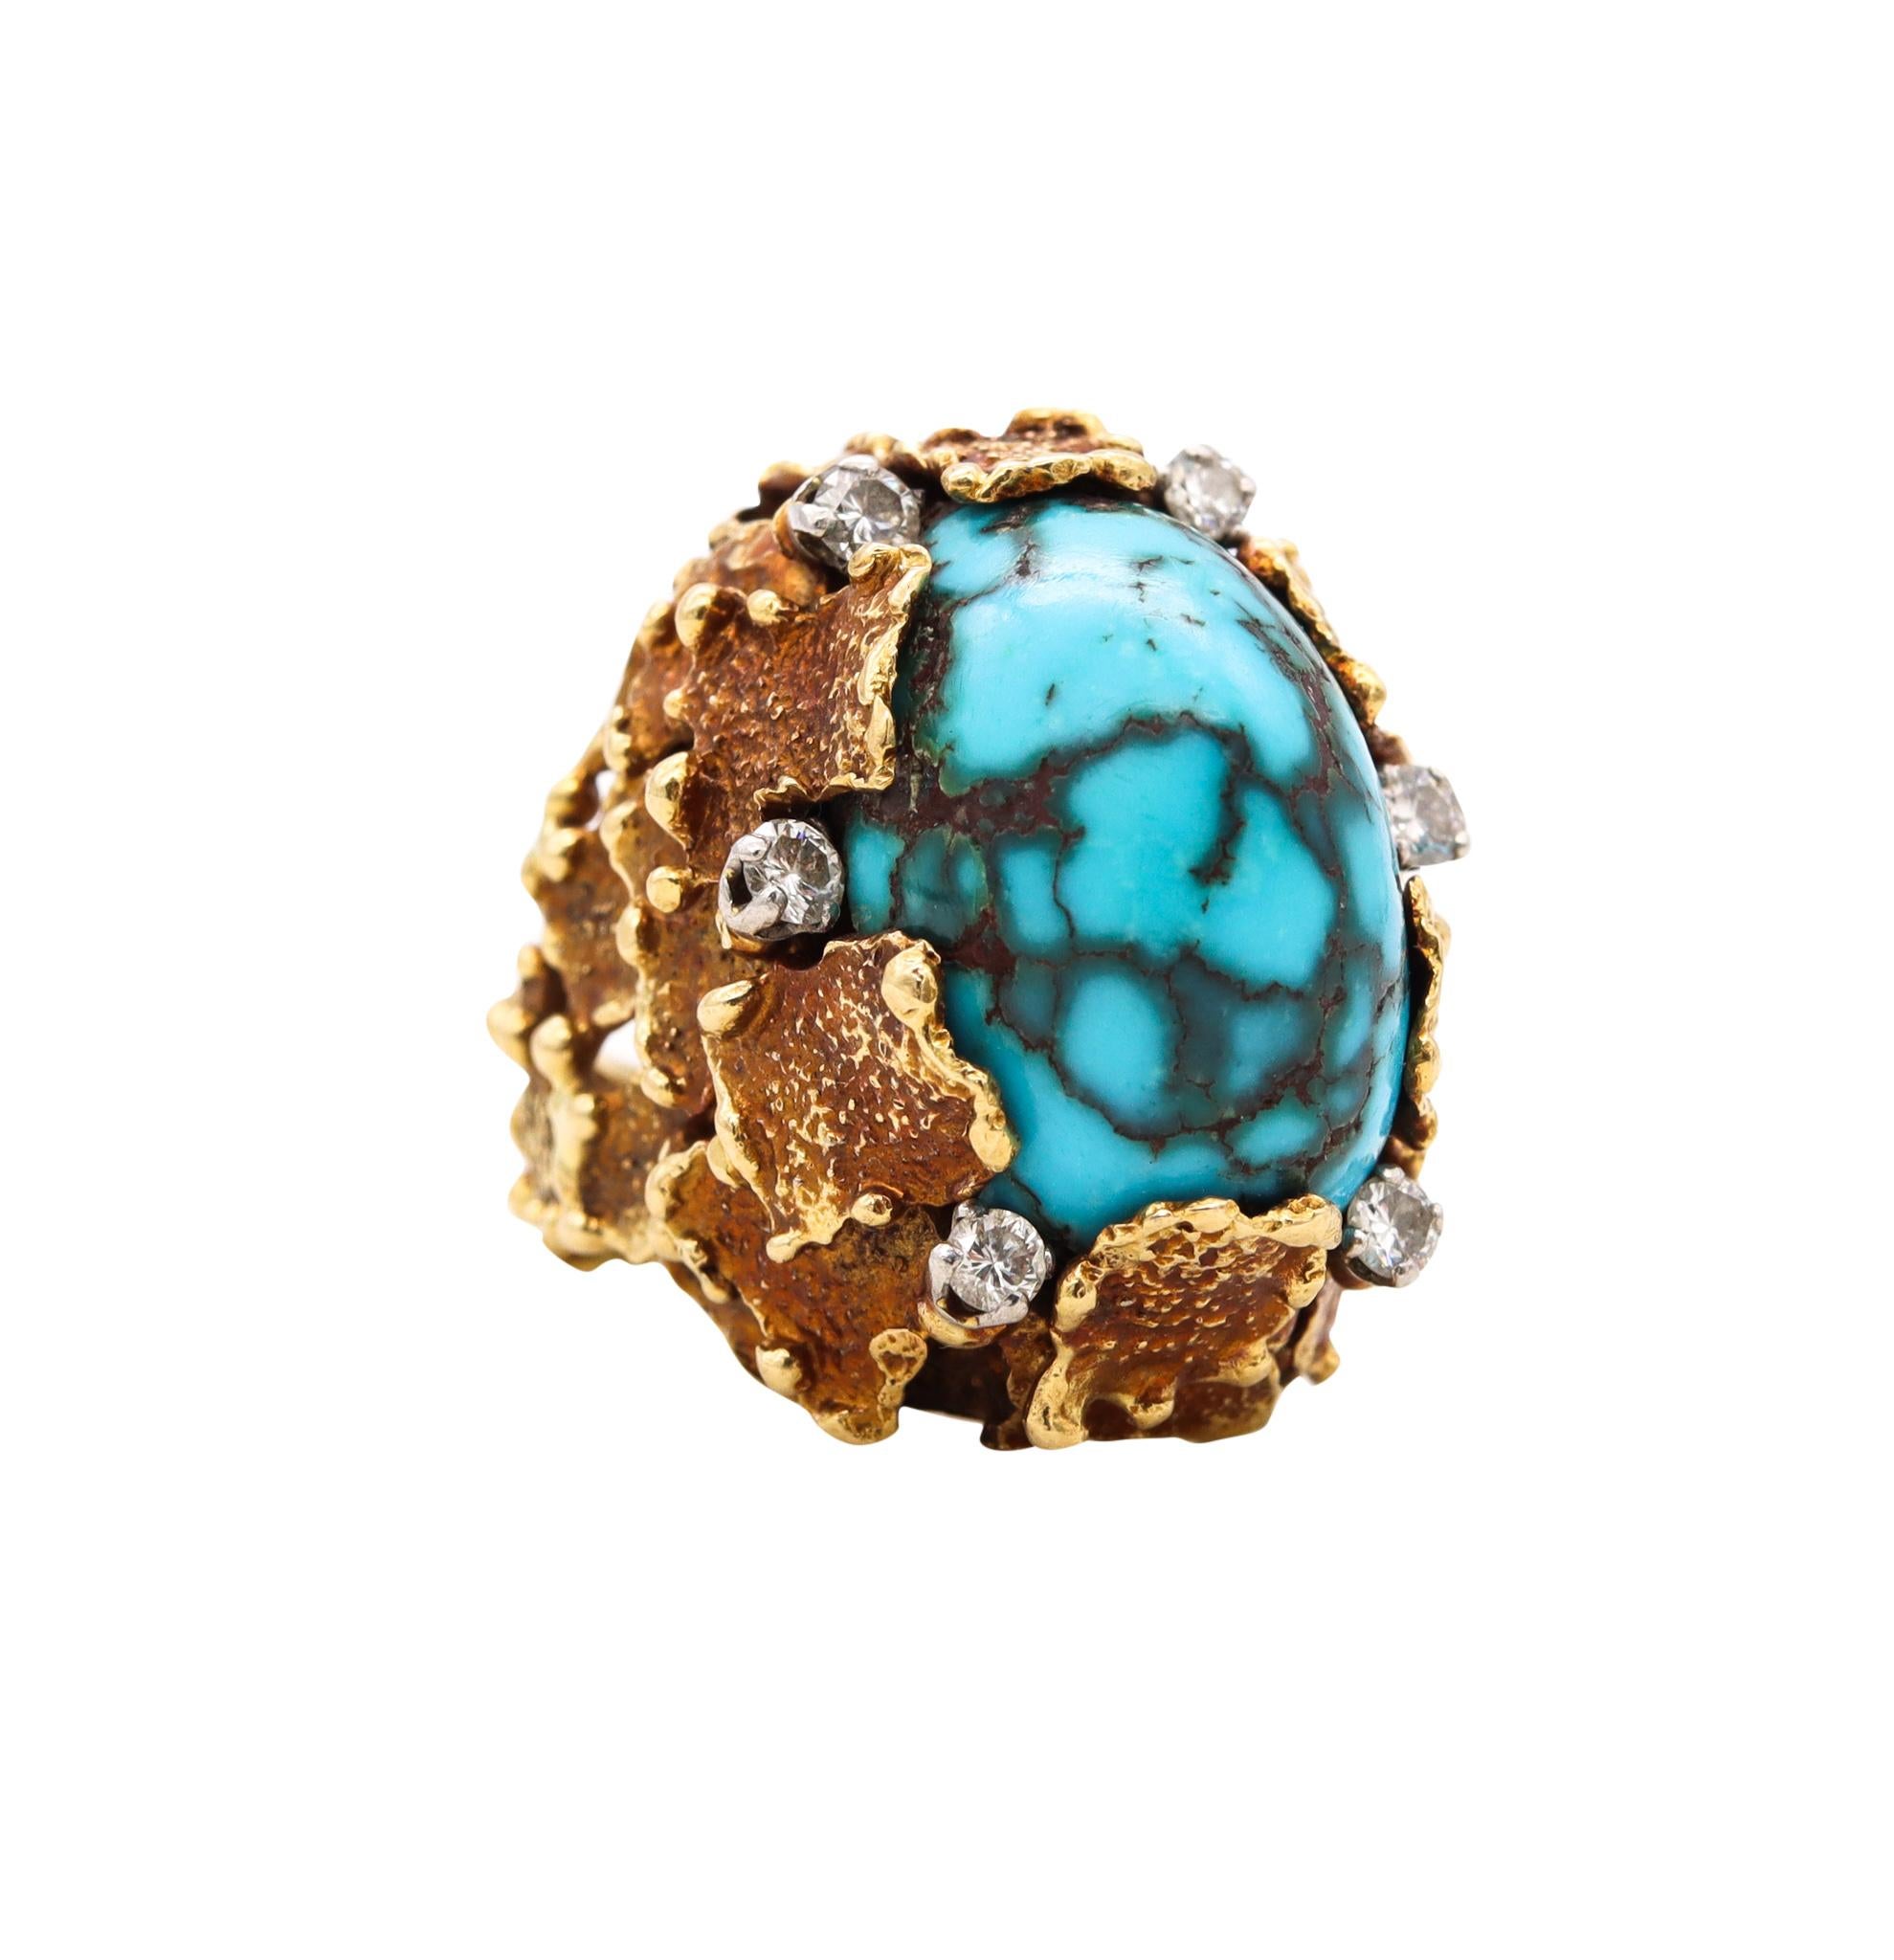 Cocktail ring designed by George Weil.

An sculptural domed bombe piece, created during the mid-century period in London England by the artist and goldsmith George Weil, back in the 1960's. The body design of this cocktail ring is made up of